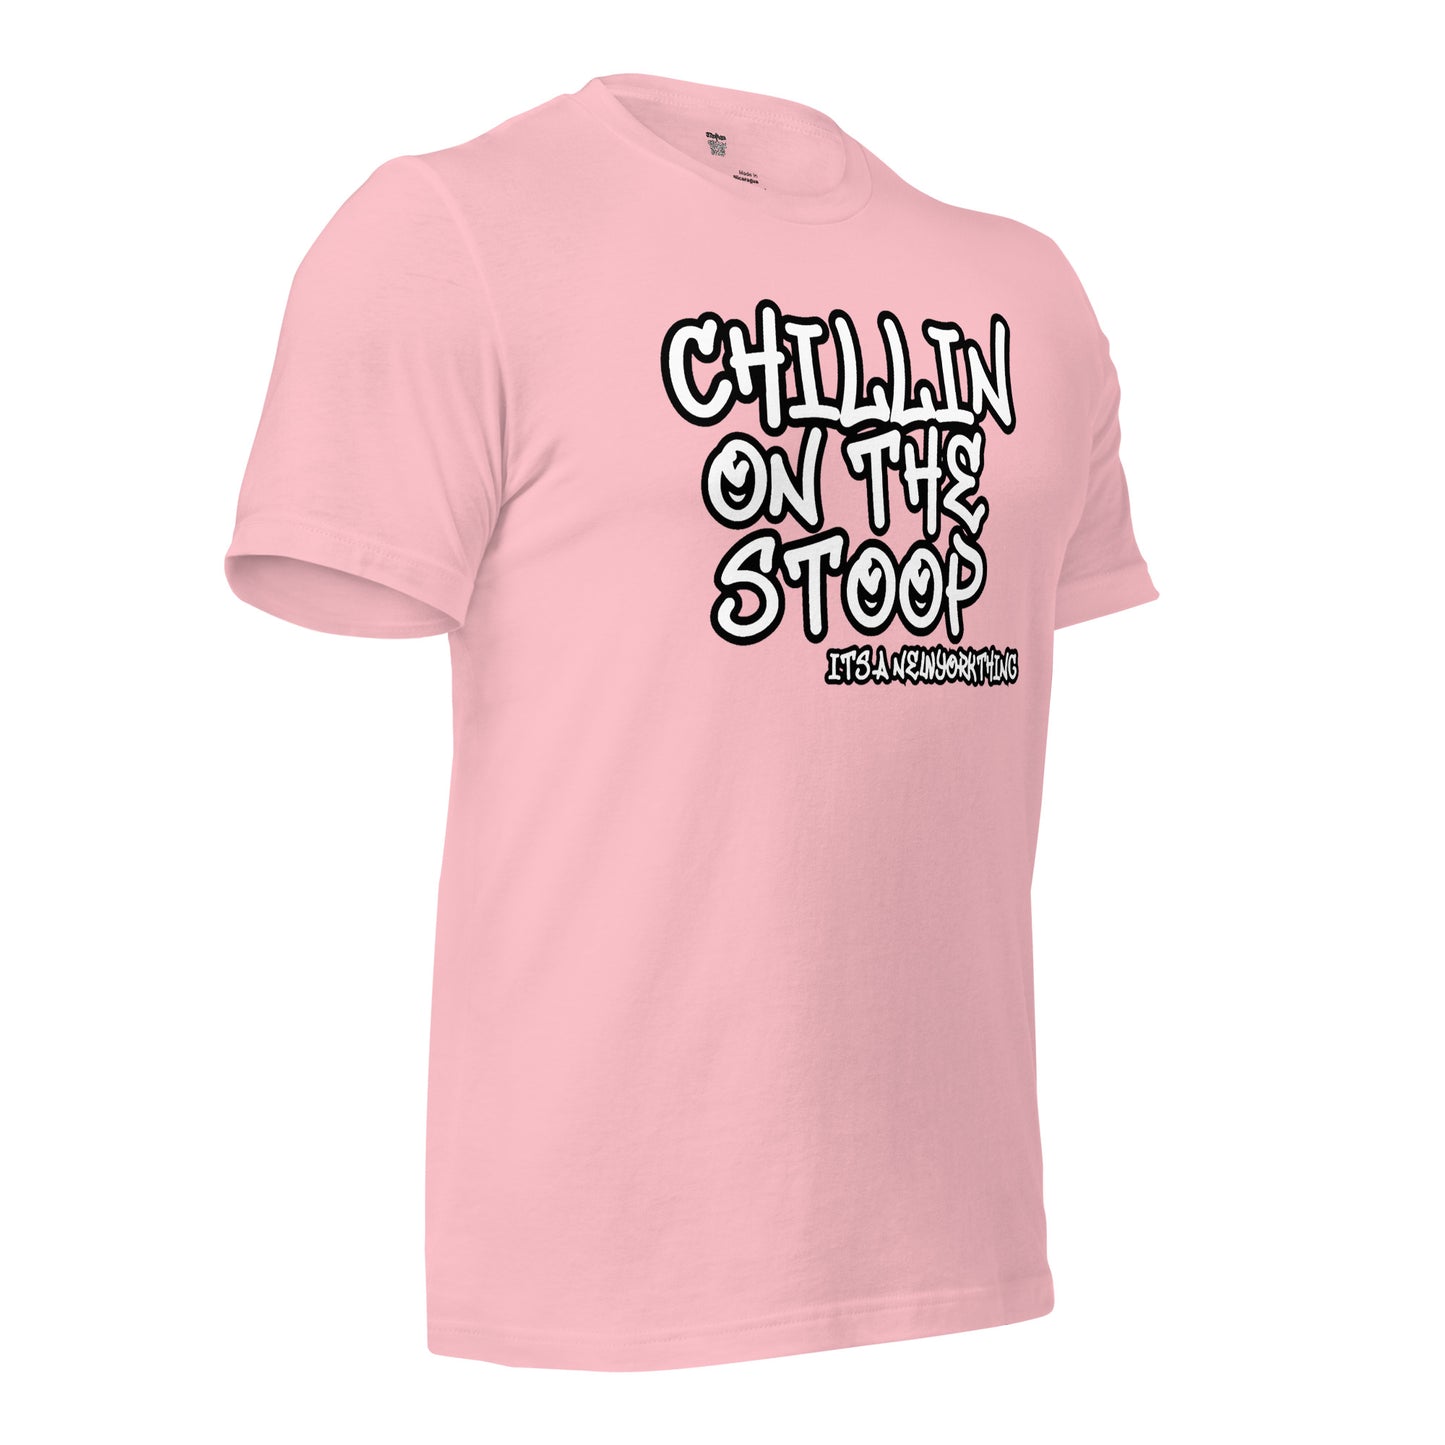 CHILLIN ON THE STOOP Unisex t-shirt different color tees